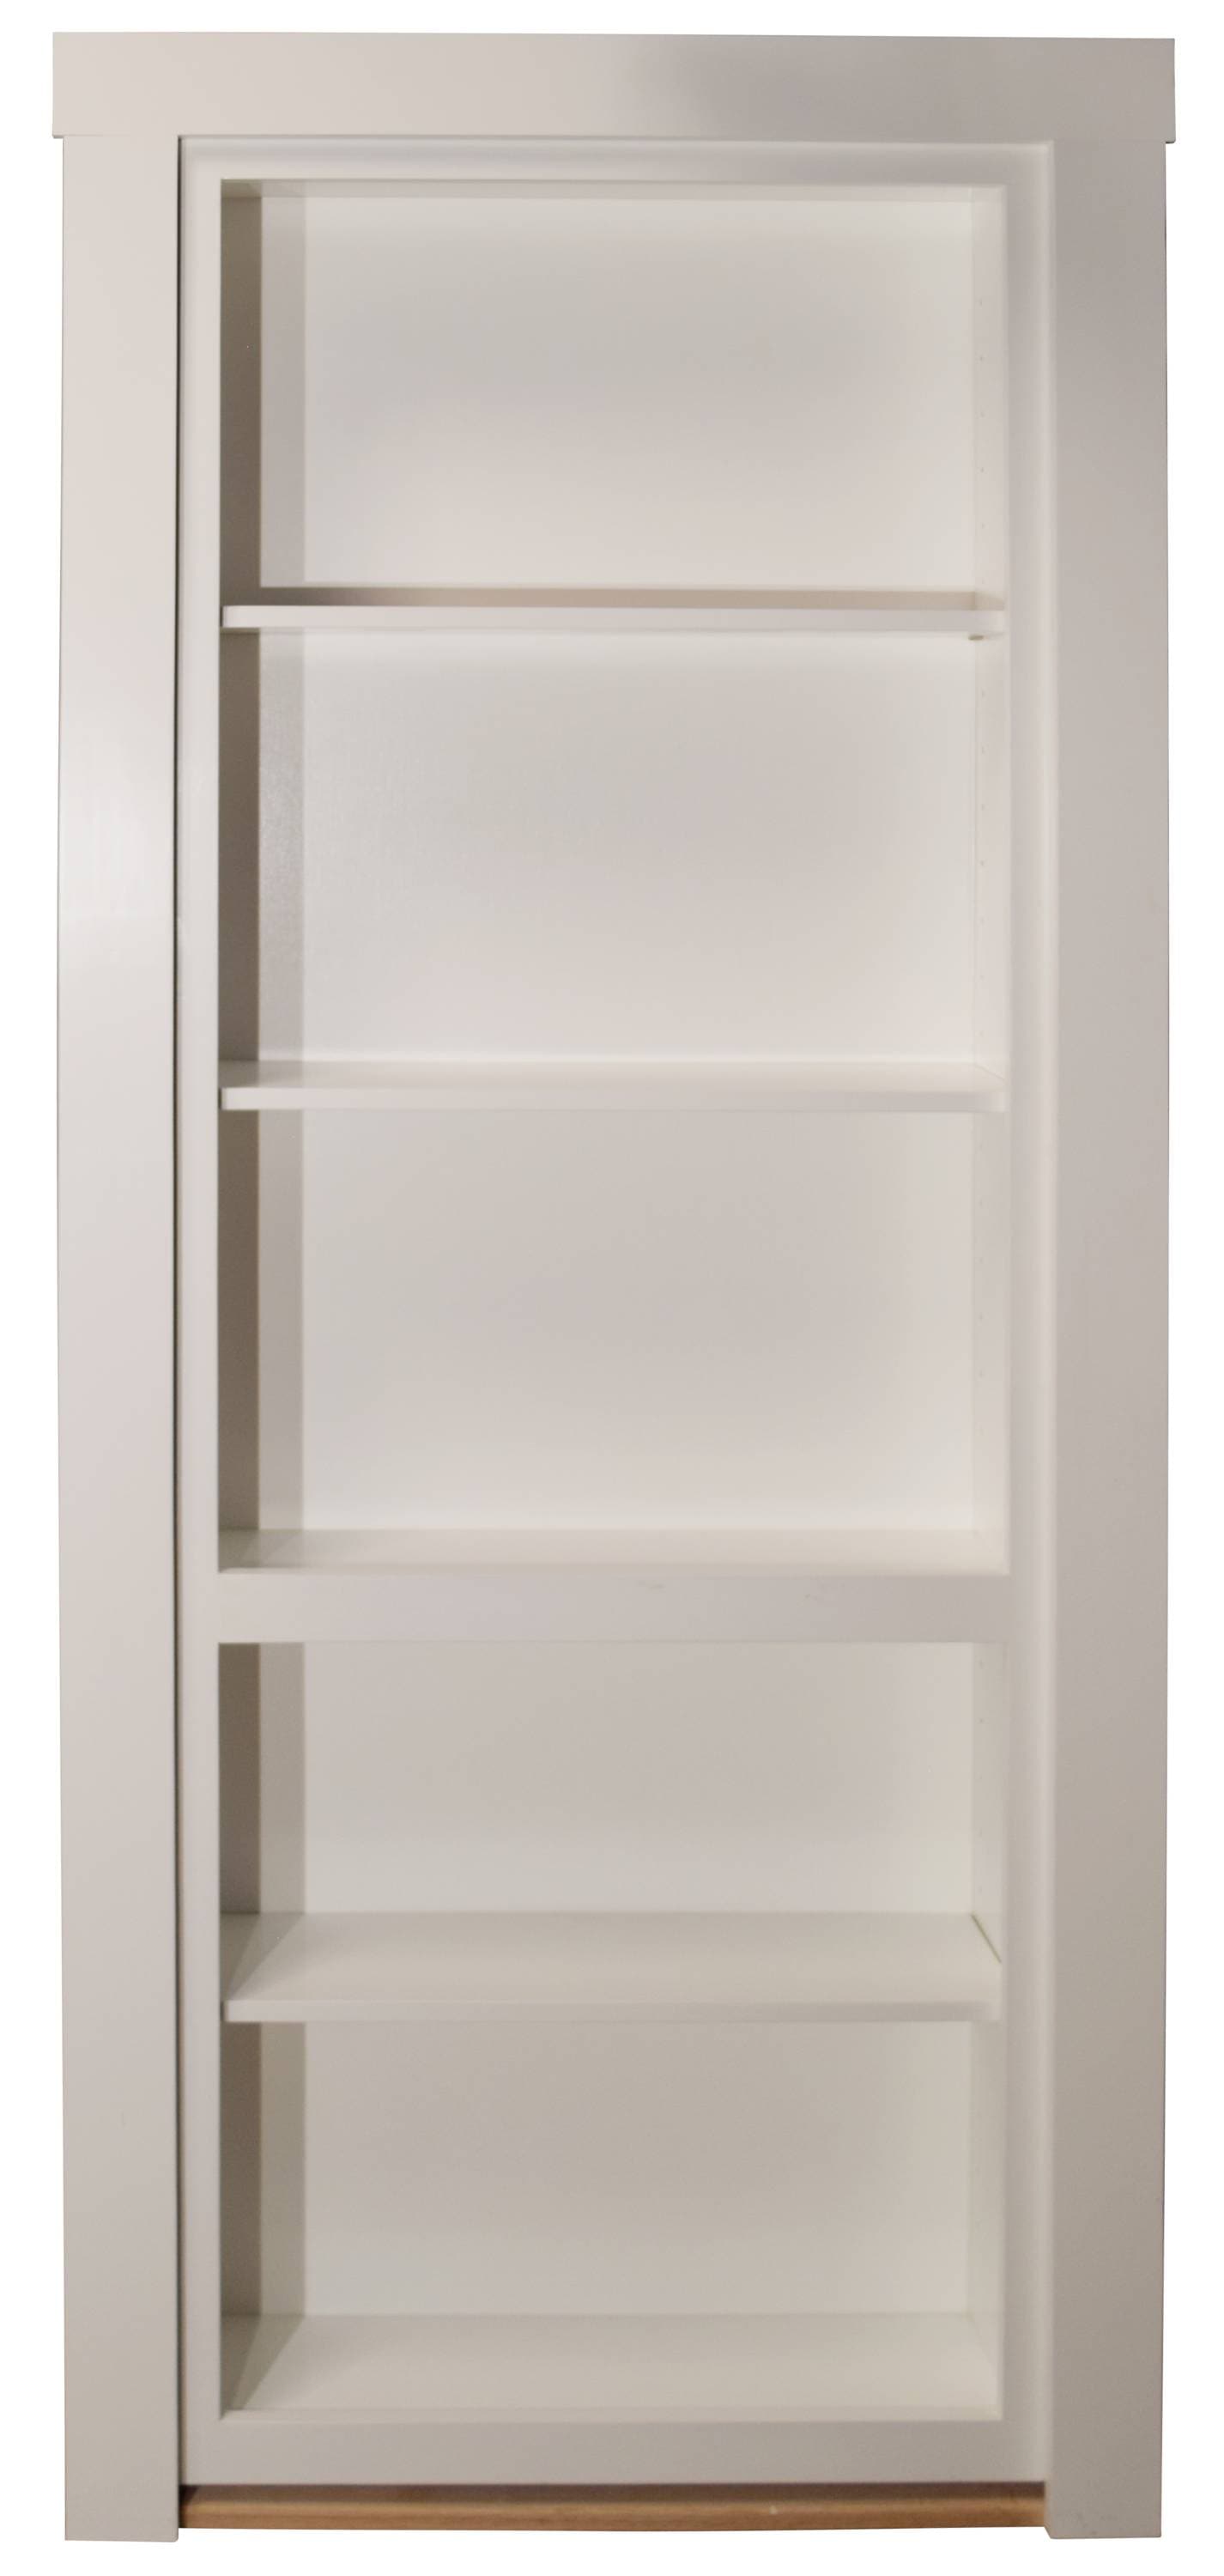 Bookcase With Doors: Protecting And Concealing Valuable Items And Sensitive Documents  